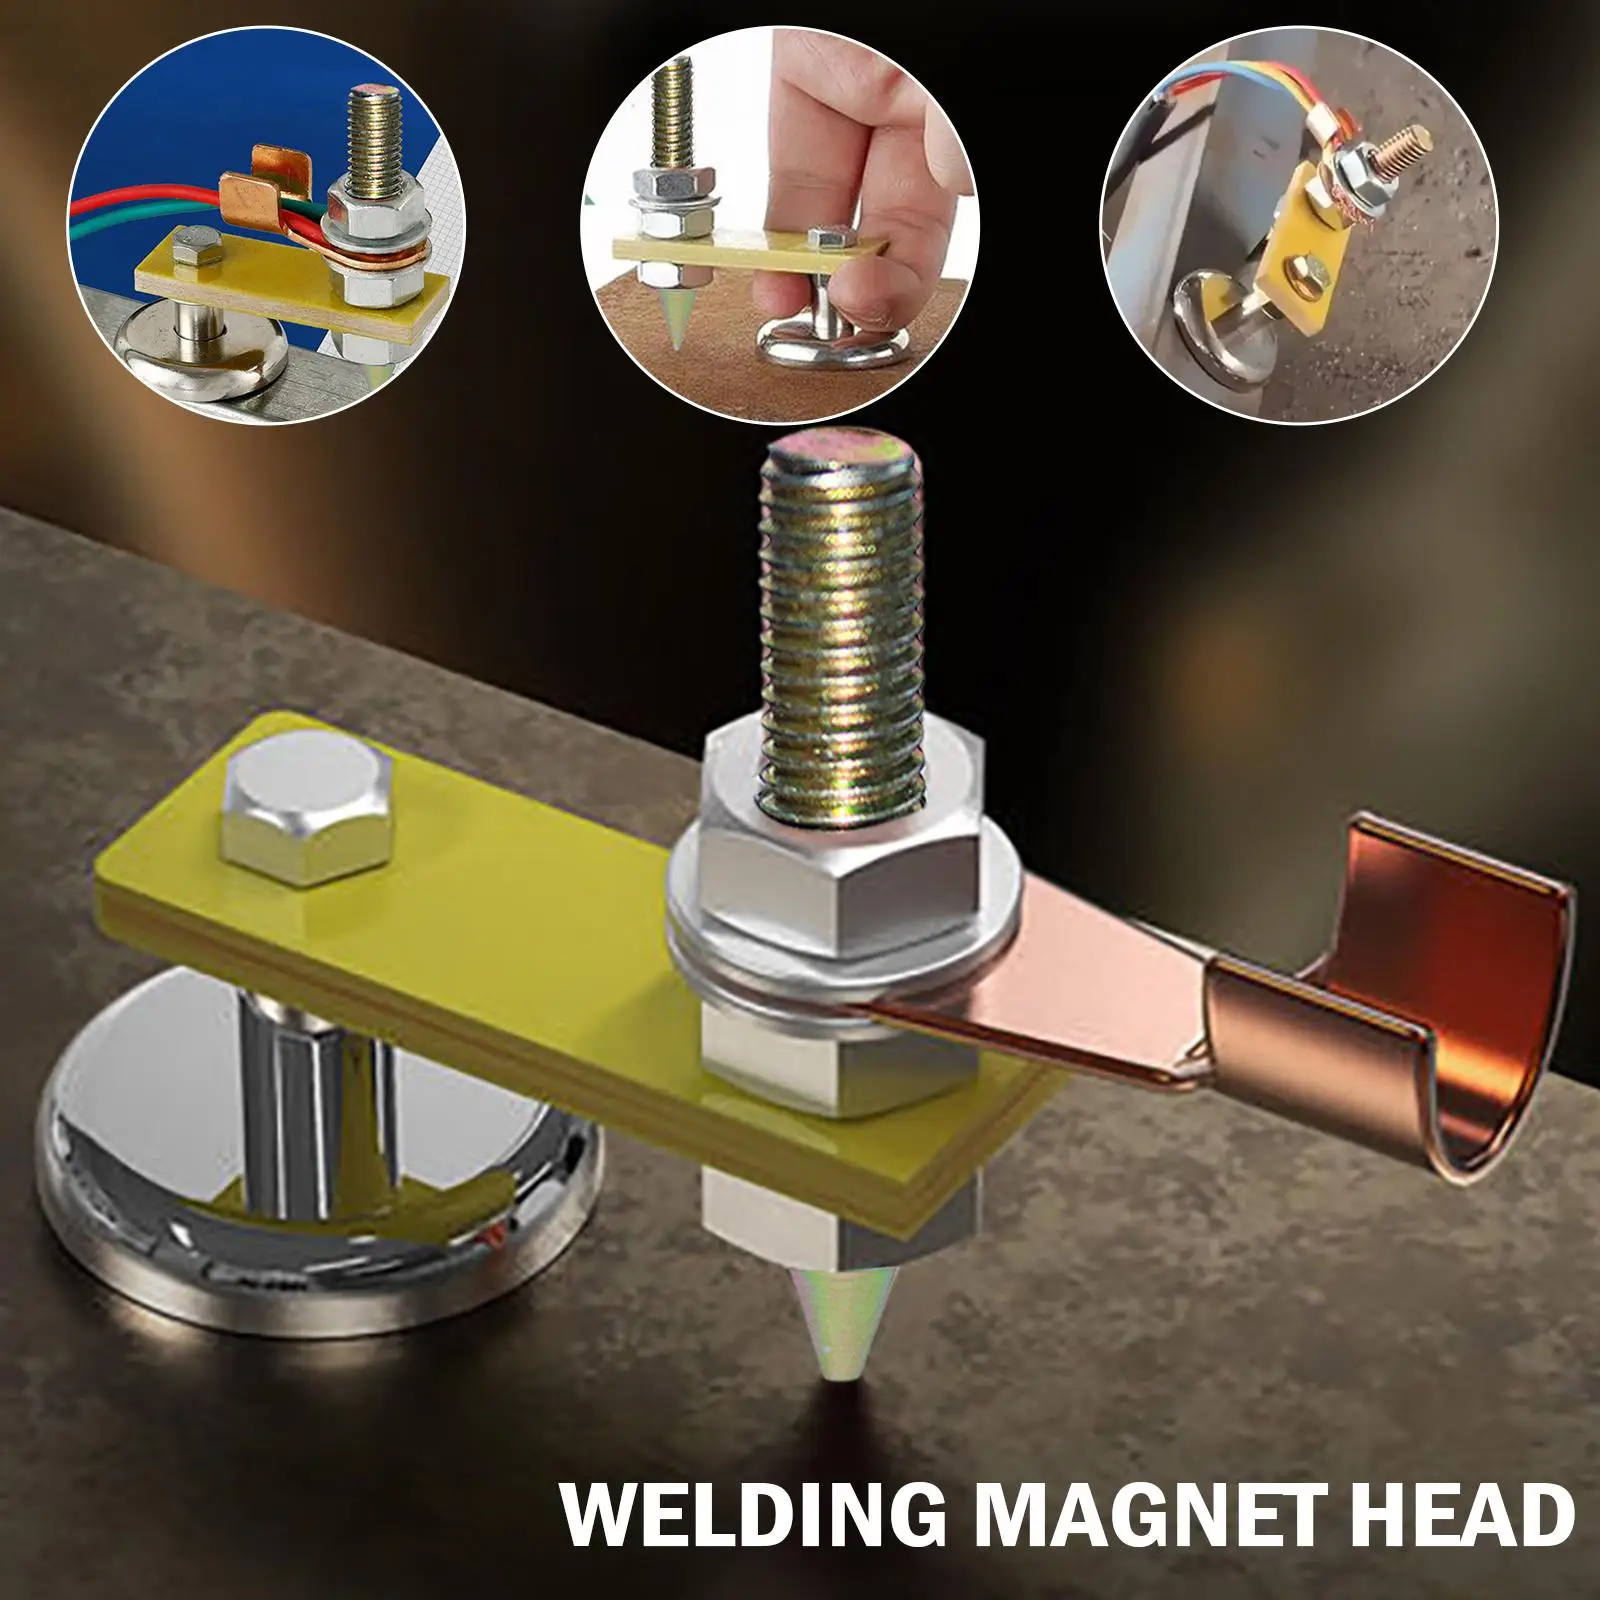 

Welding Magnet Magnetic Welding Fix Ground Clamp Strong Magnetic Welding Support For Electric Welding Ground Tools N2z8